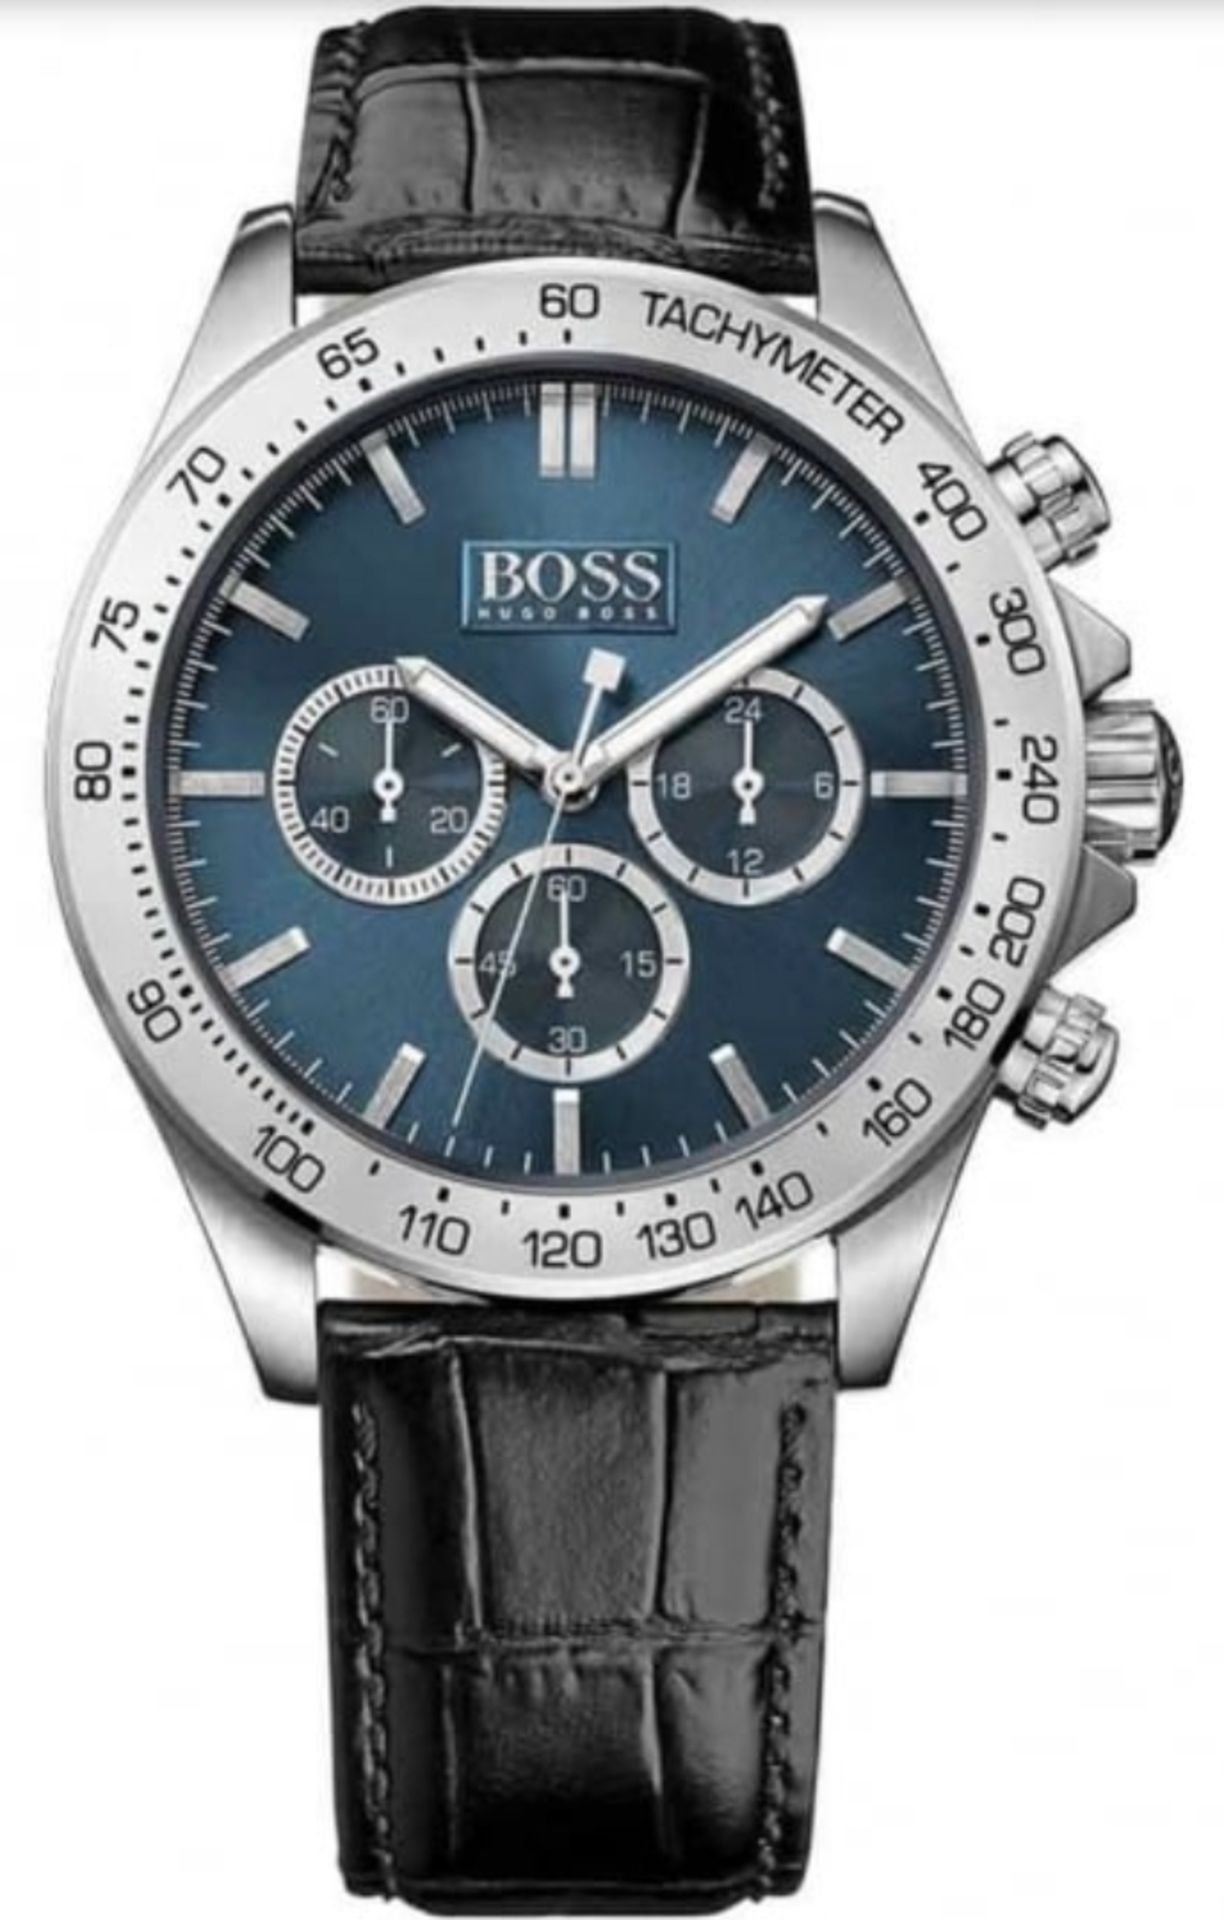 Hugo Boss Trade Lot 1C. A Total Of 20 Brand New Hugo Boss Watches - Image 10 of 20